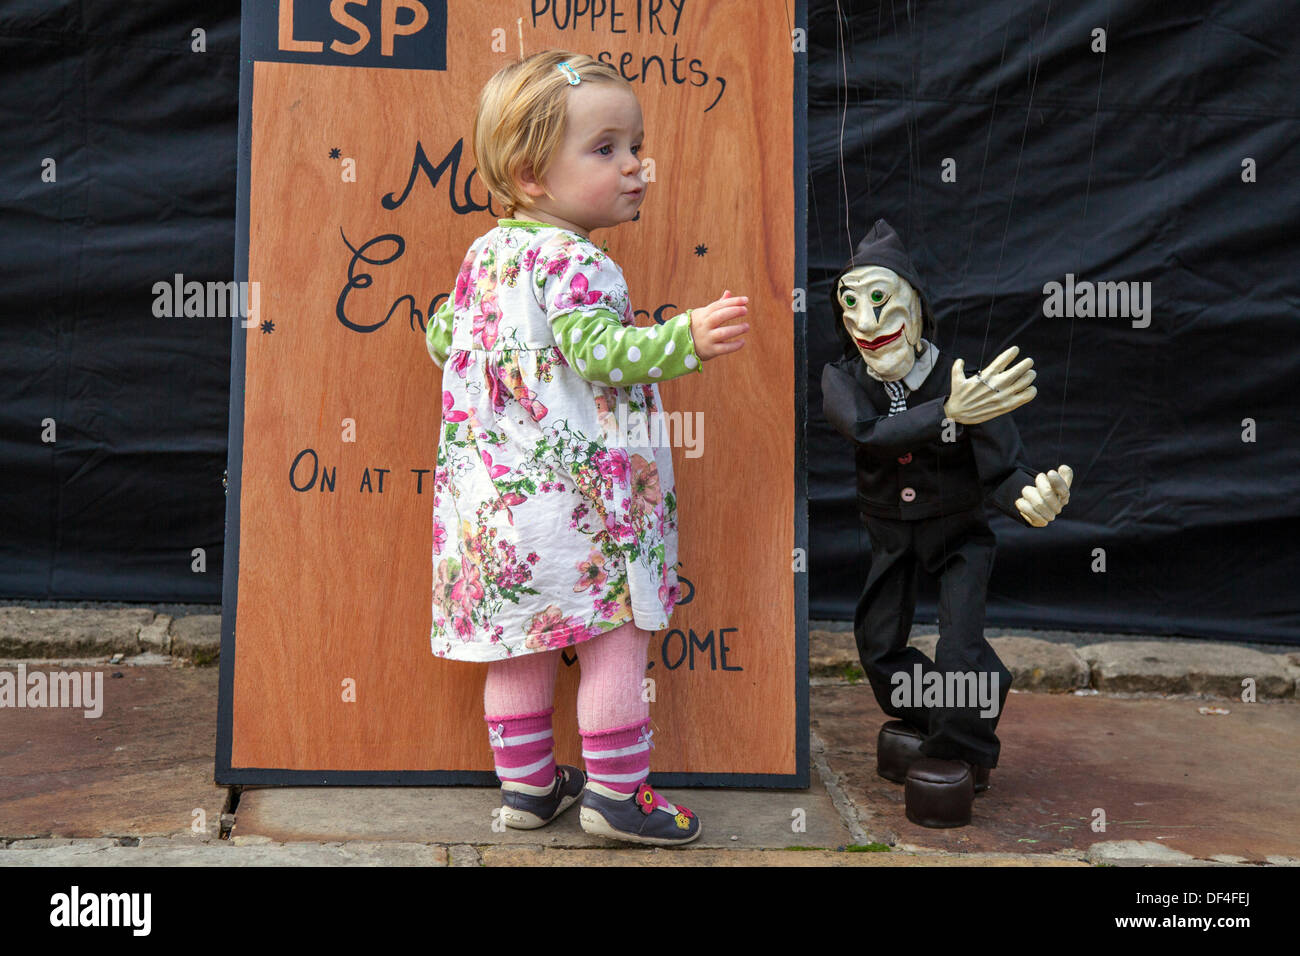 Puppeteers in Skipton UK. 27th September, 2013. International Puppet Festival. Daisy Le Drew, 1 year old baby from Derby at Skipton's biennial international puppet festival featuring puppet theatre control companies from all over Europe. Stock Photo